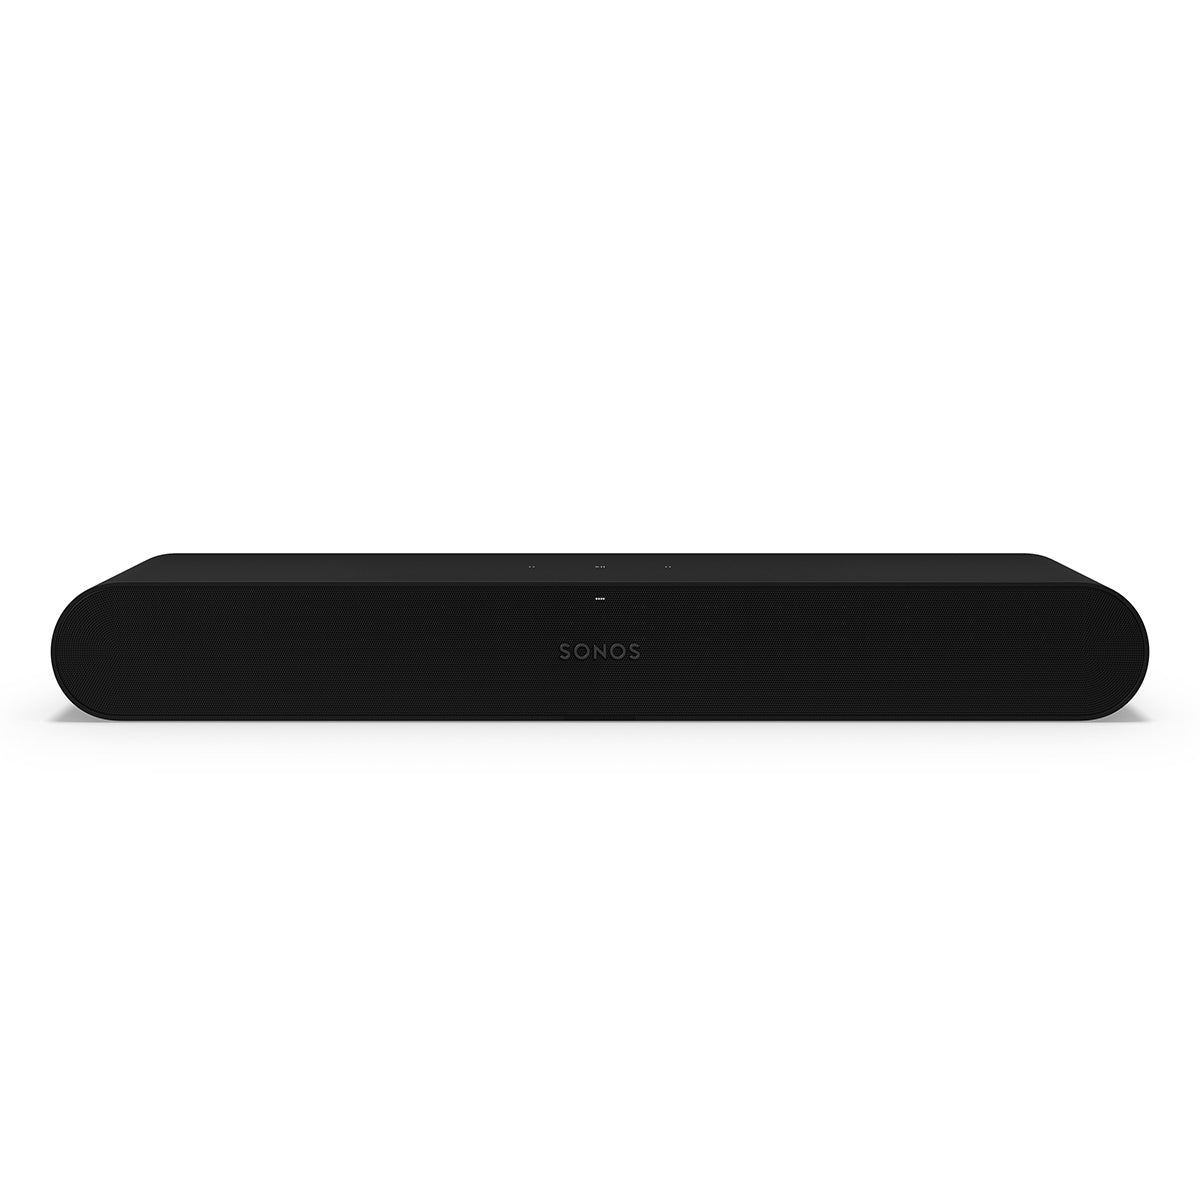 Sonos Immersive Set with Ray Compact Soundbar, Sub Mini Wireless Subwoofer, and Pair of One Wireless Smart Speakers (Gen 2) (Black)